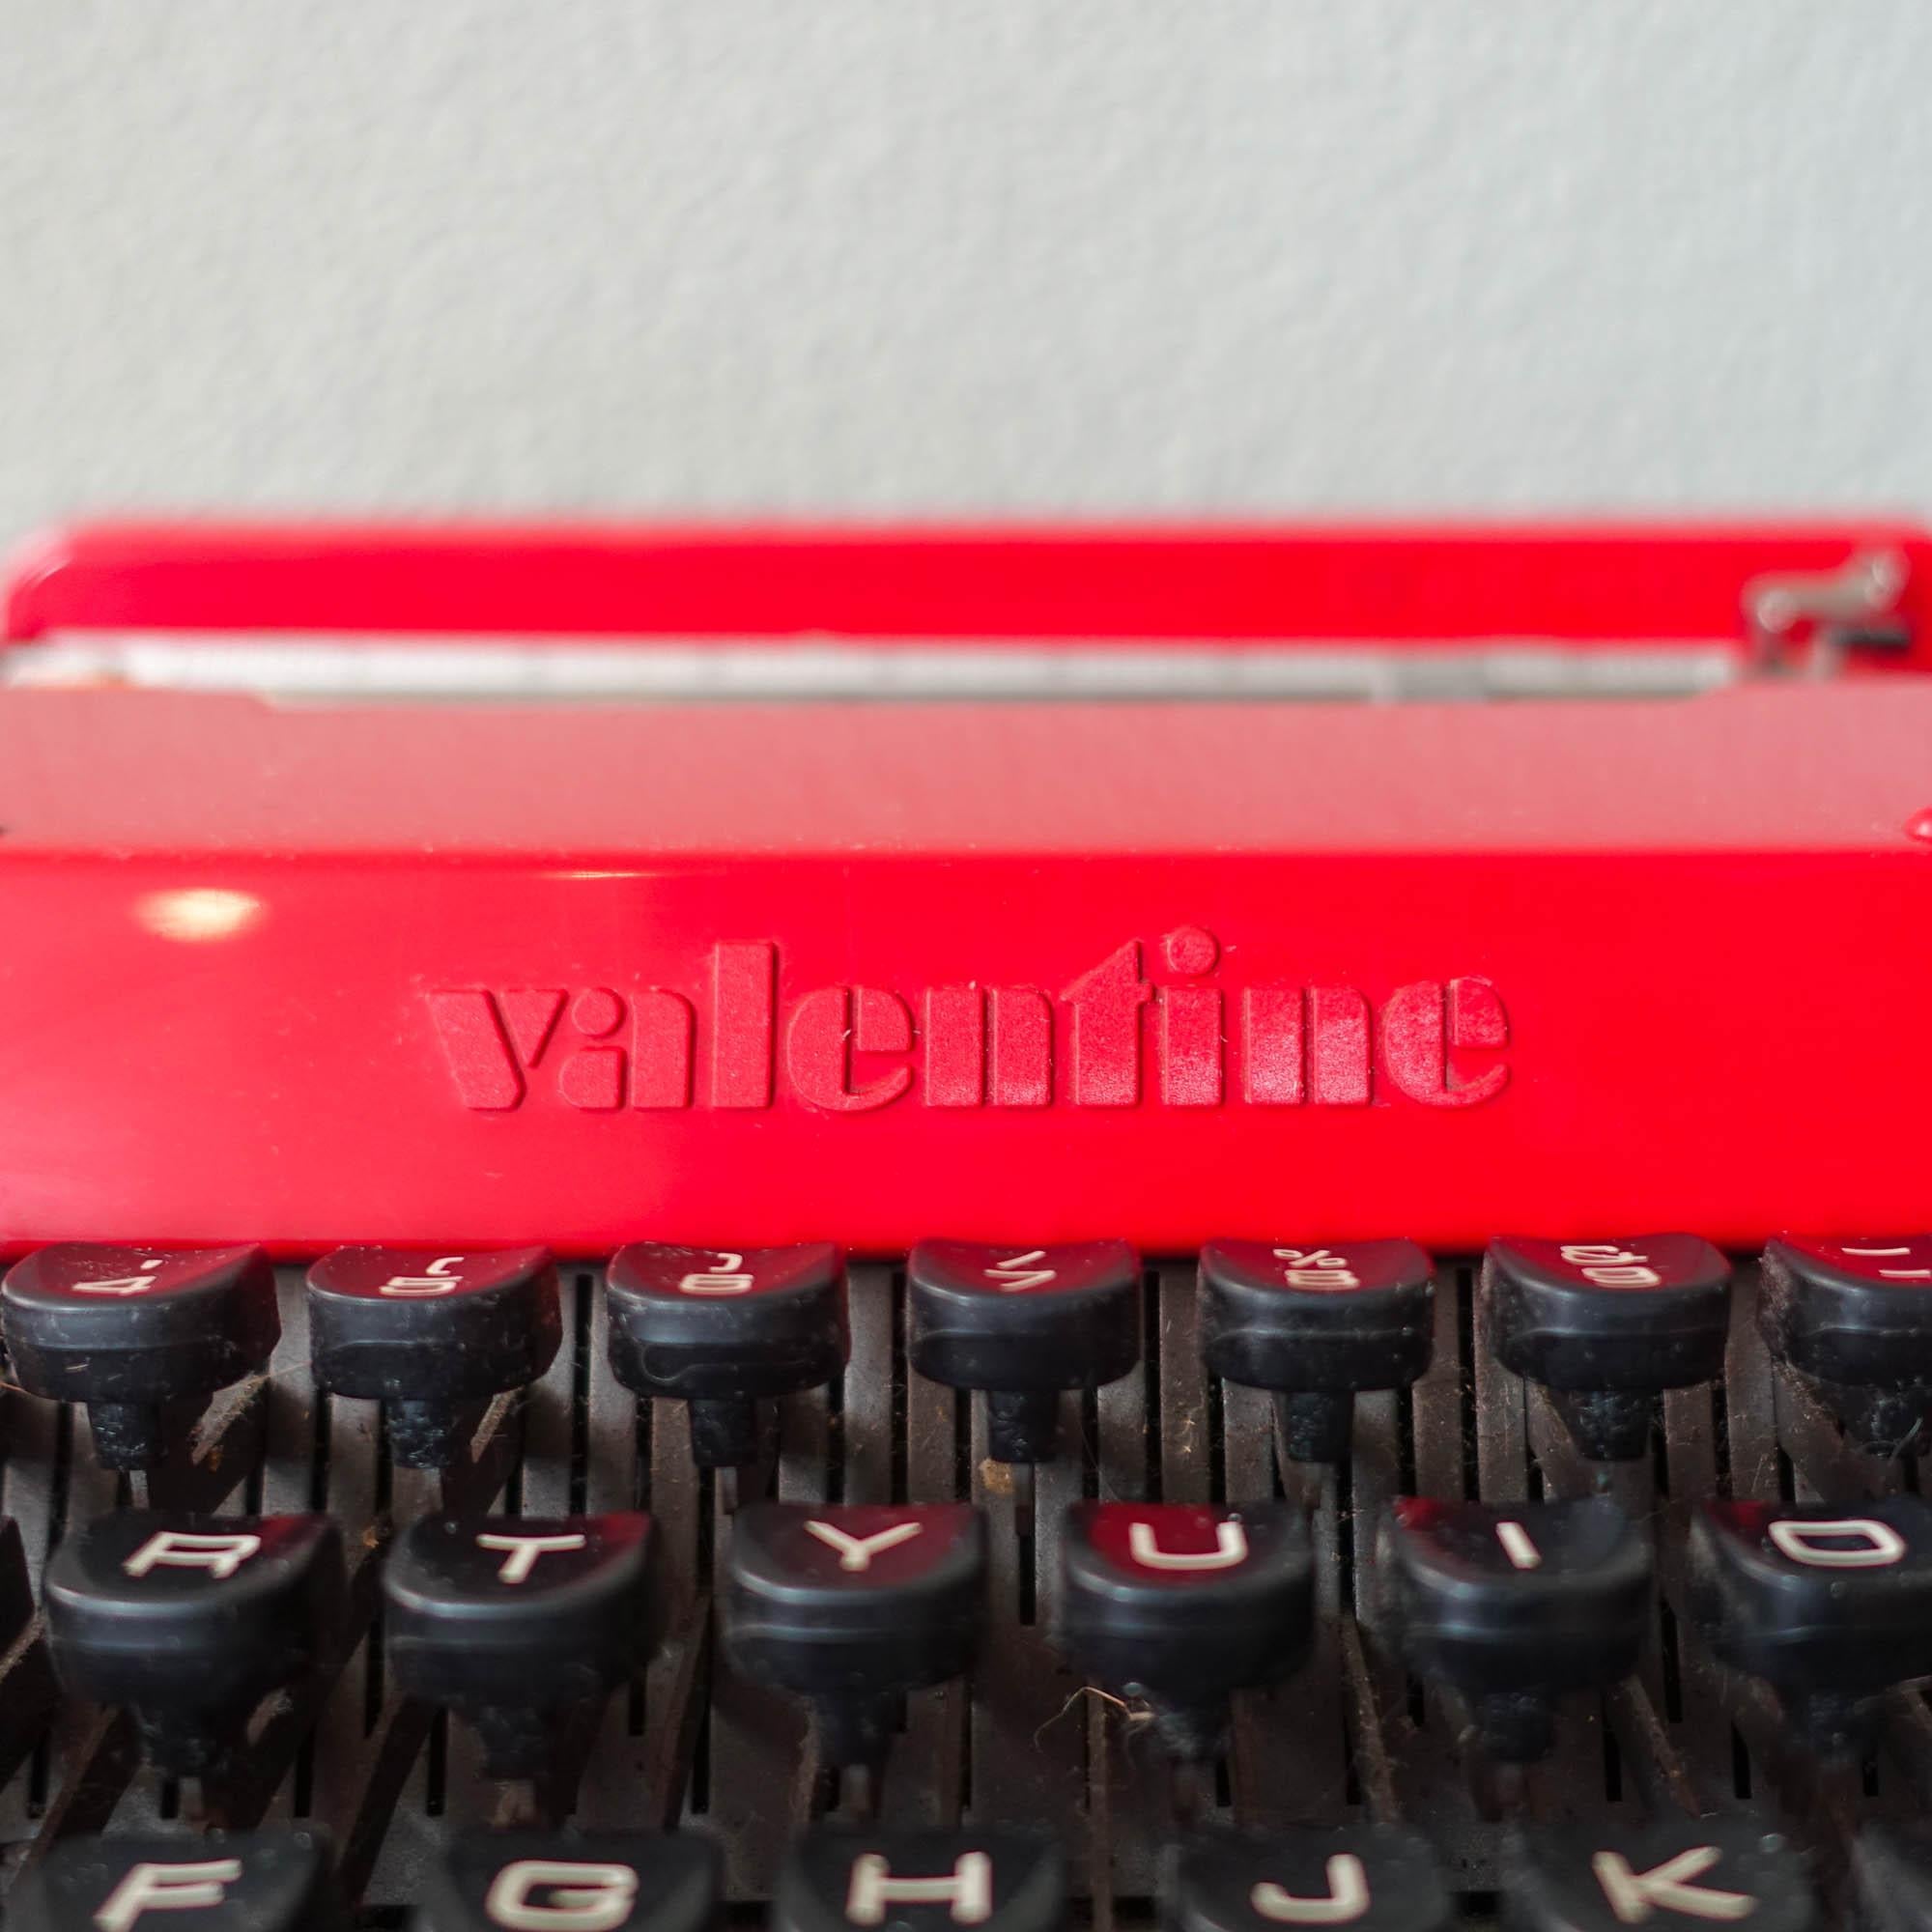 italien Type-writer rouge Valentine d'Ettore Sottsass & Perry King pour Olivetti Synthesis